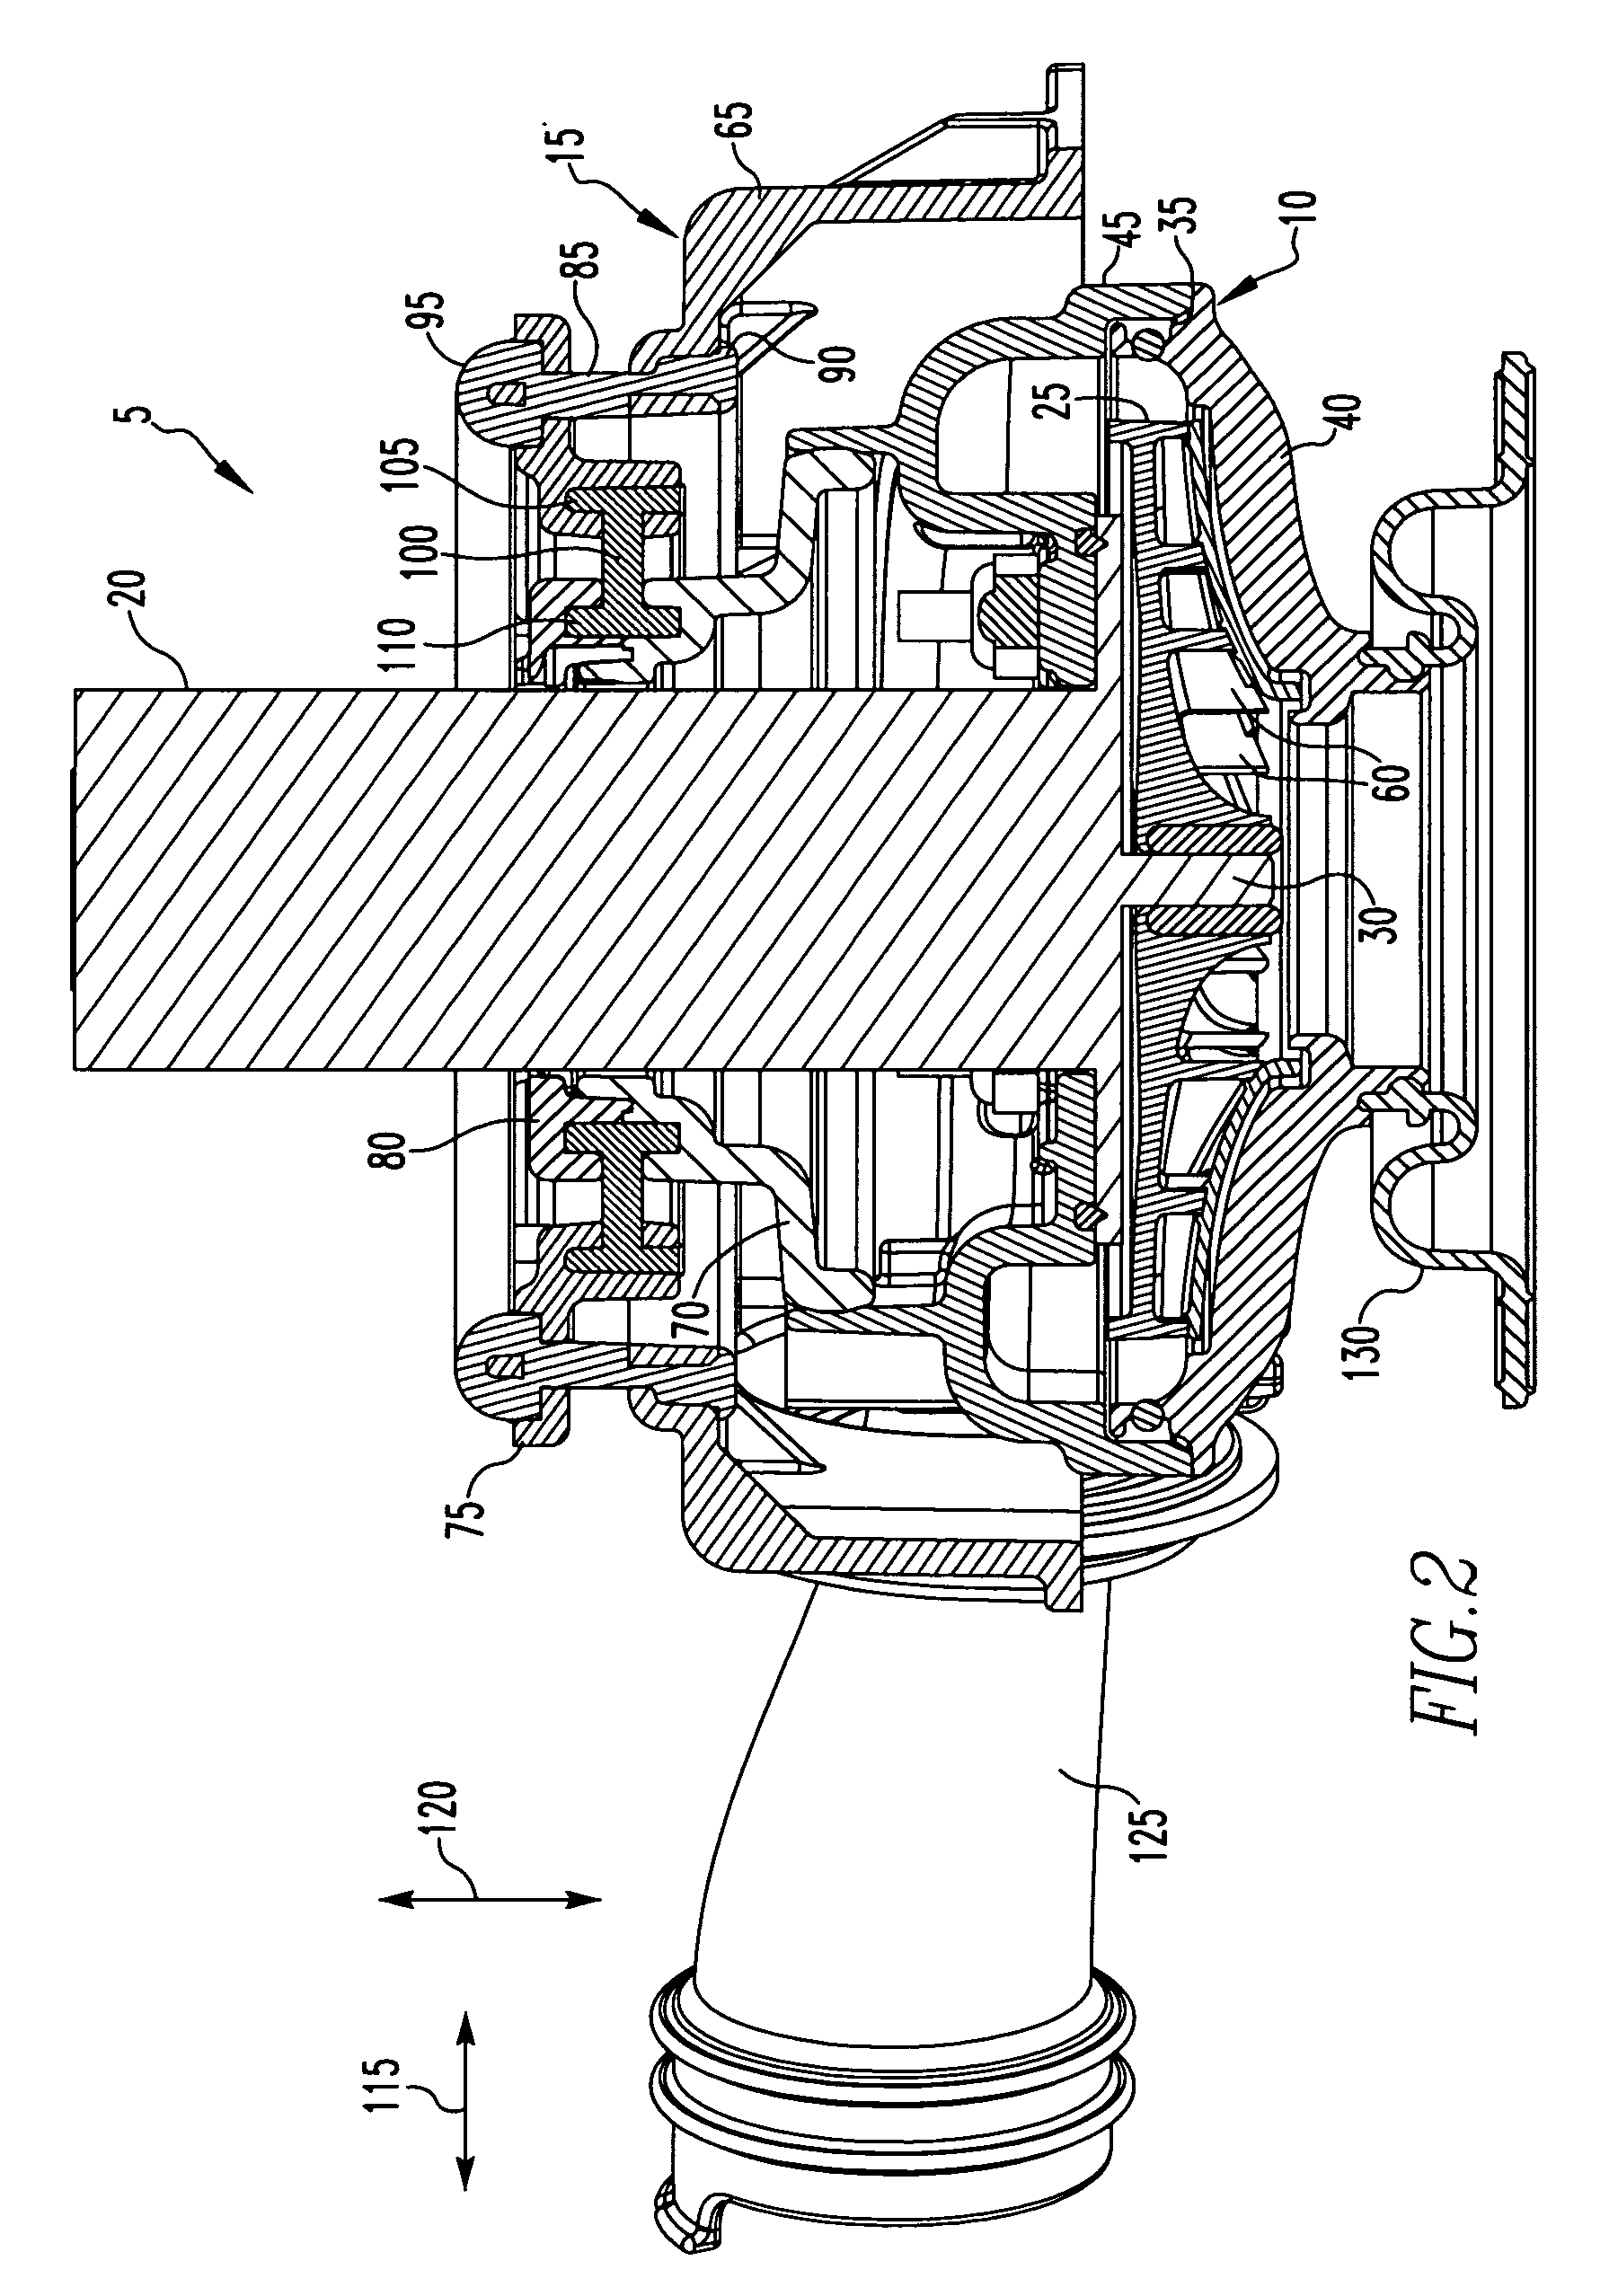 Gas delivery system including a flow generator having an isolated blower assembly for noise reduction